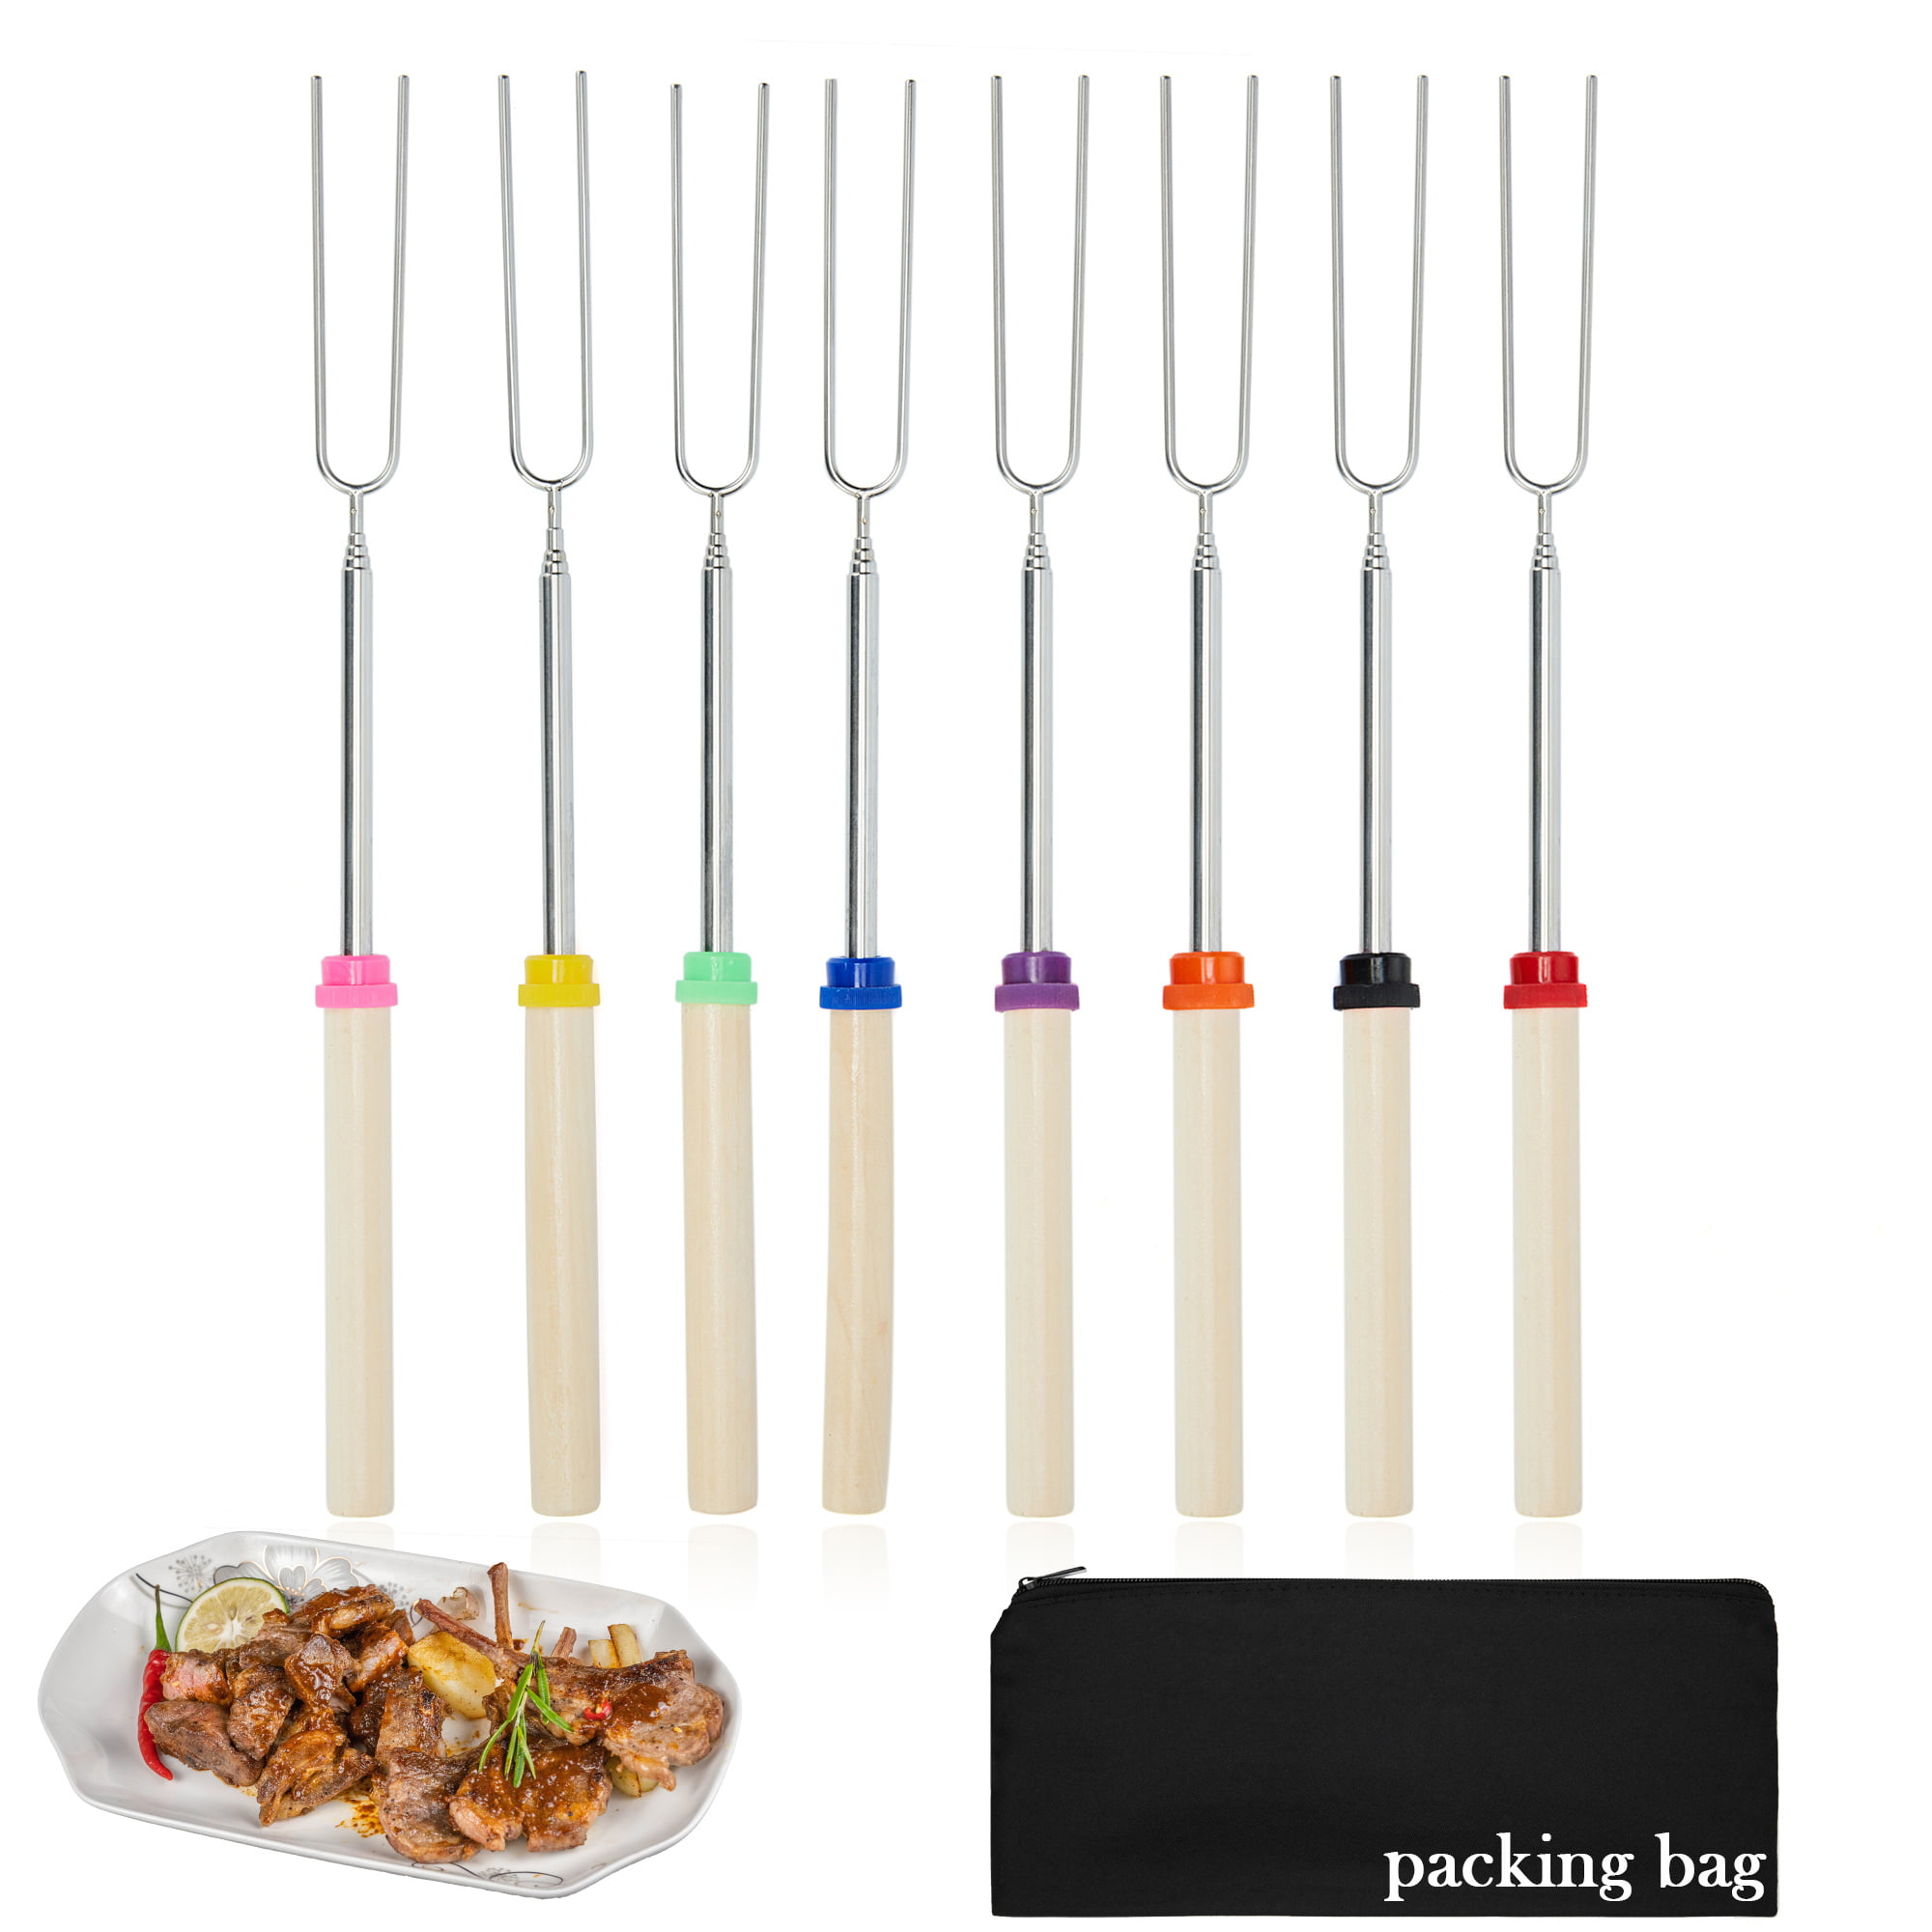 32 Inch Smores Skewers BBQ Forks for Camping Fire Pit Picnic Backyard Party 8 Pack Stainless Steel Barbecue Forks Sticks with Wooden Handle CUUKSHKN Extendable Roasting Sticks 